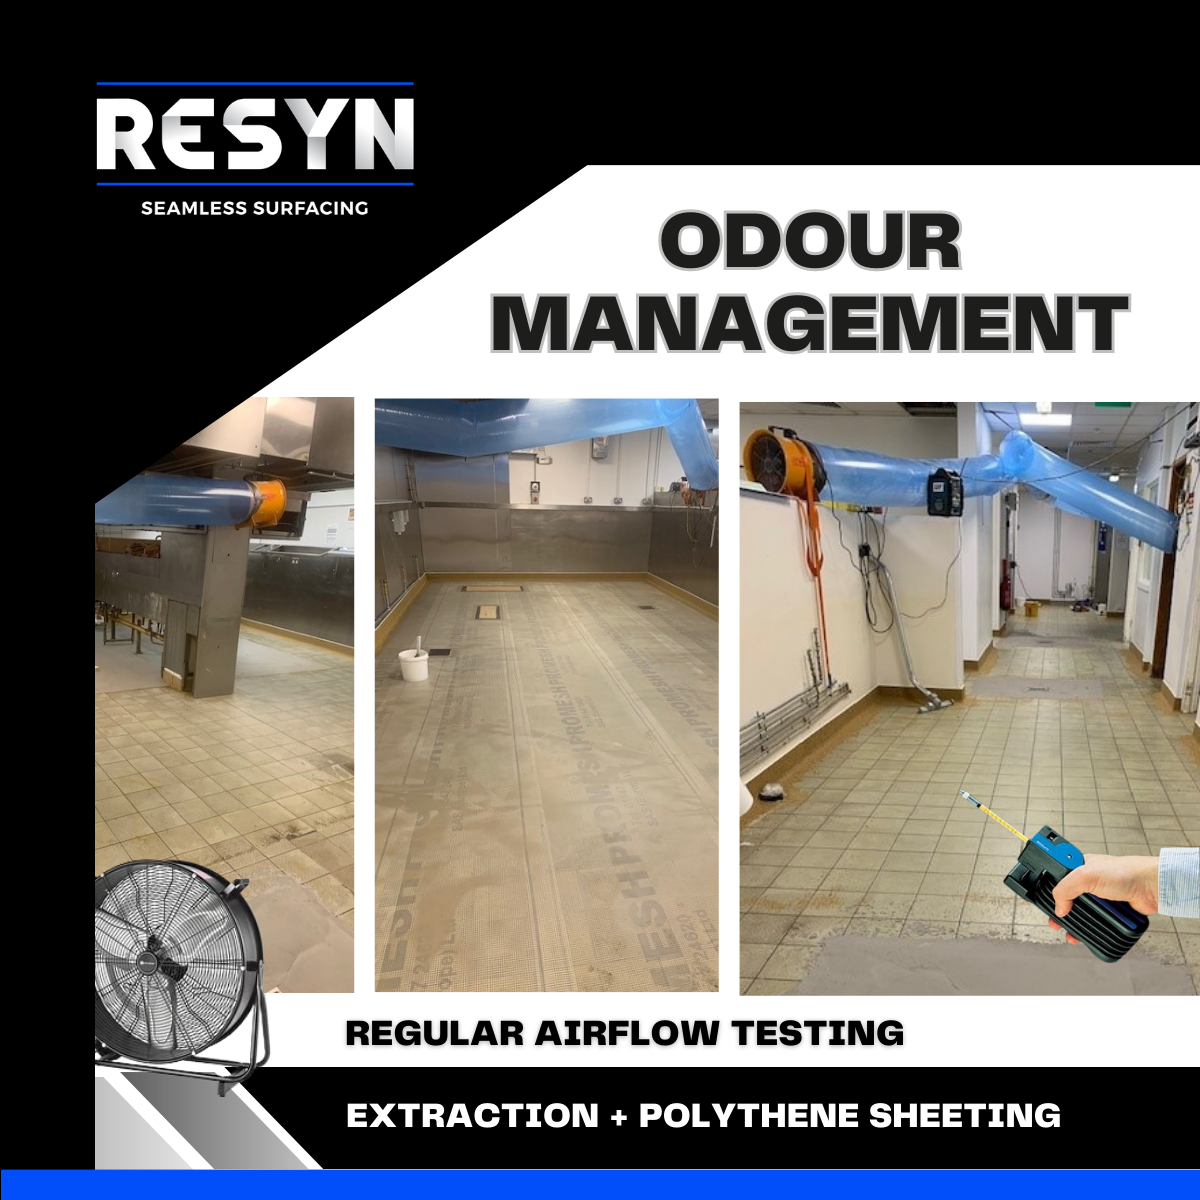 MMA resin floors and odour management